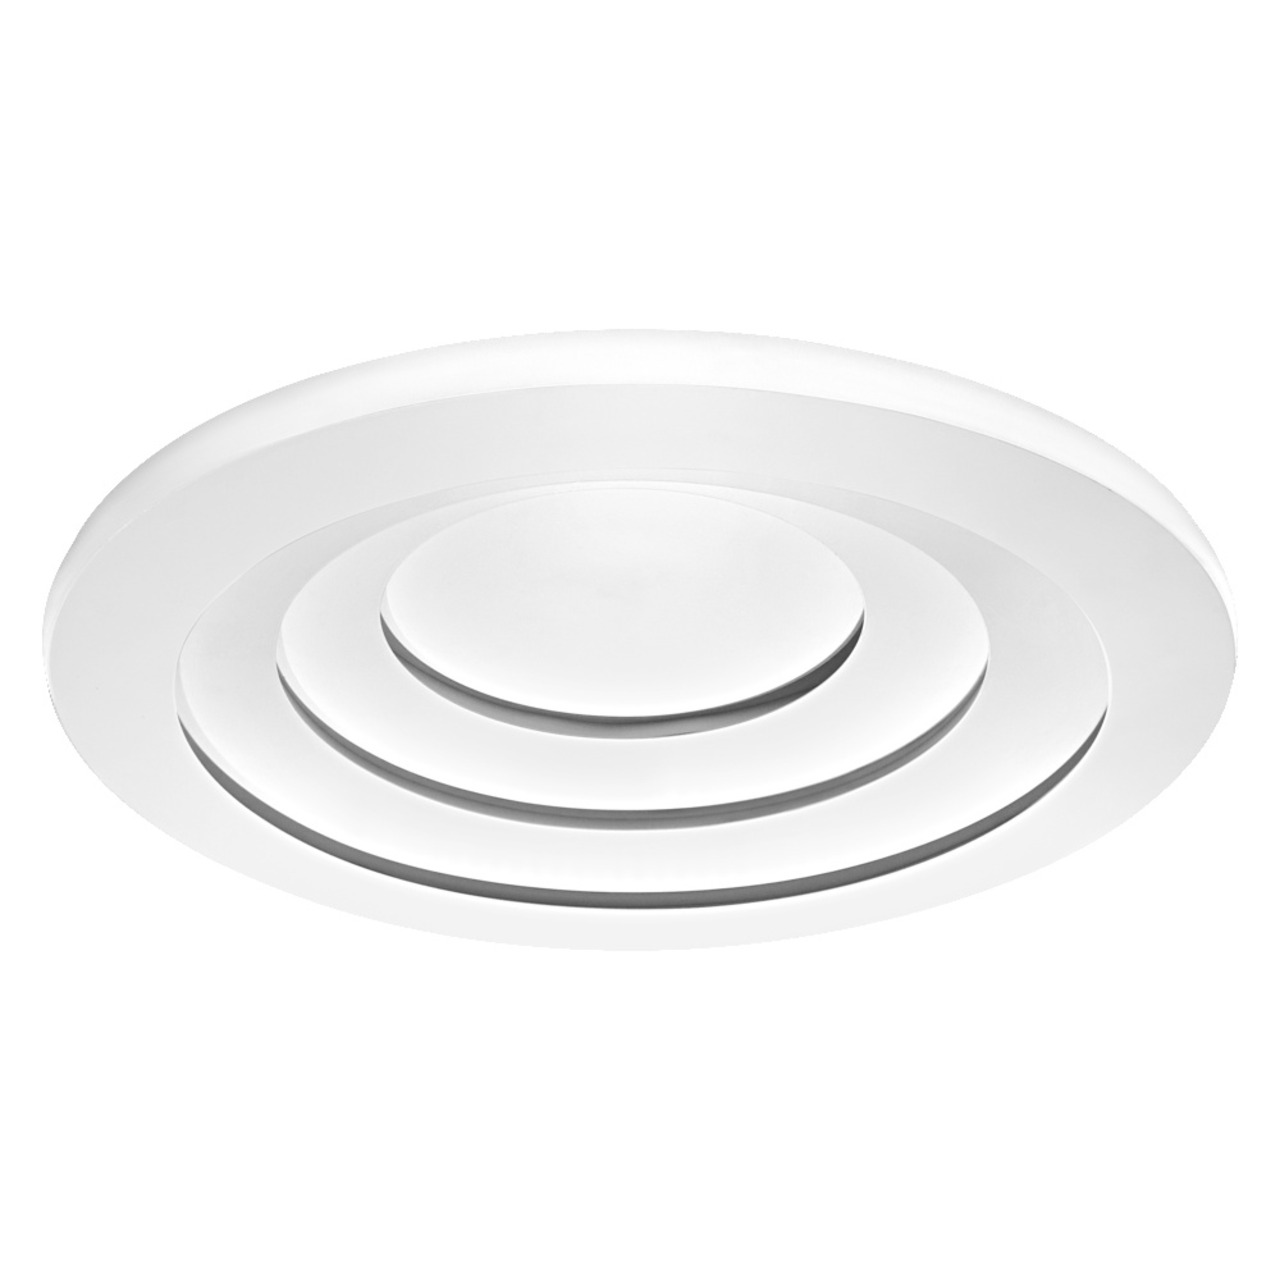 LEDVANCE SMART+ WiFi 40-W-LED-Deckenleuchte ORBIS SPIRAL- 4060 lm- Tunable White- dimmbar unter Beleuchtung